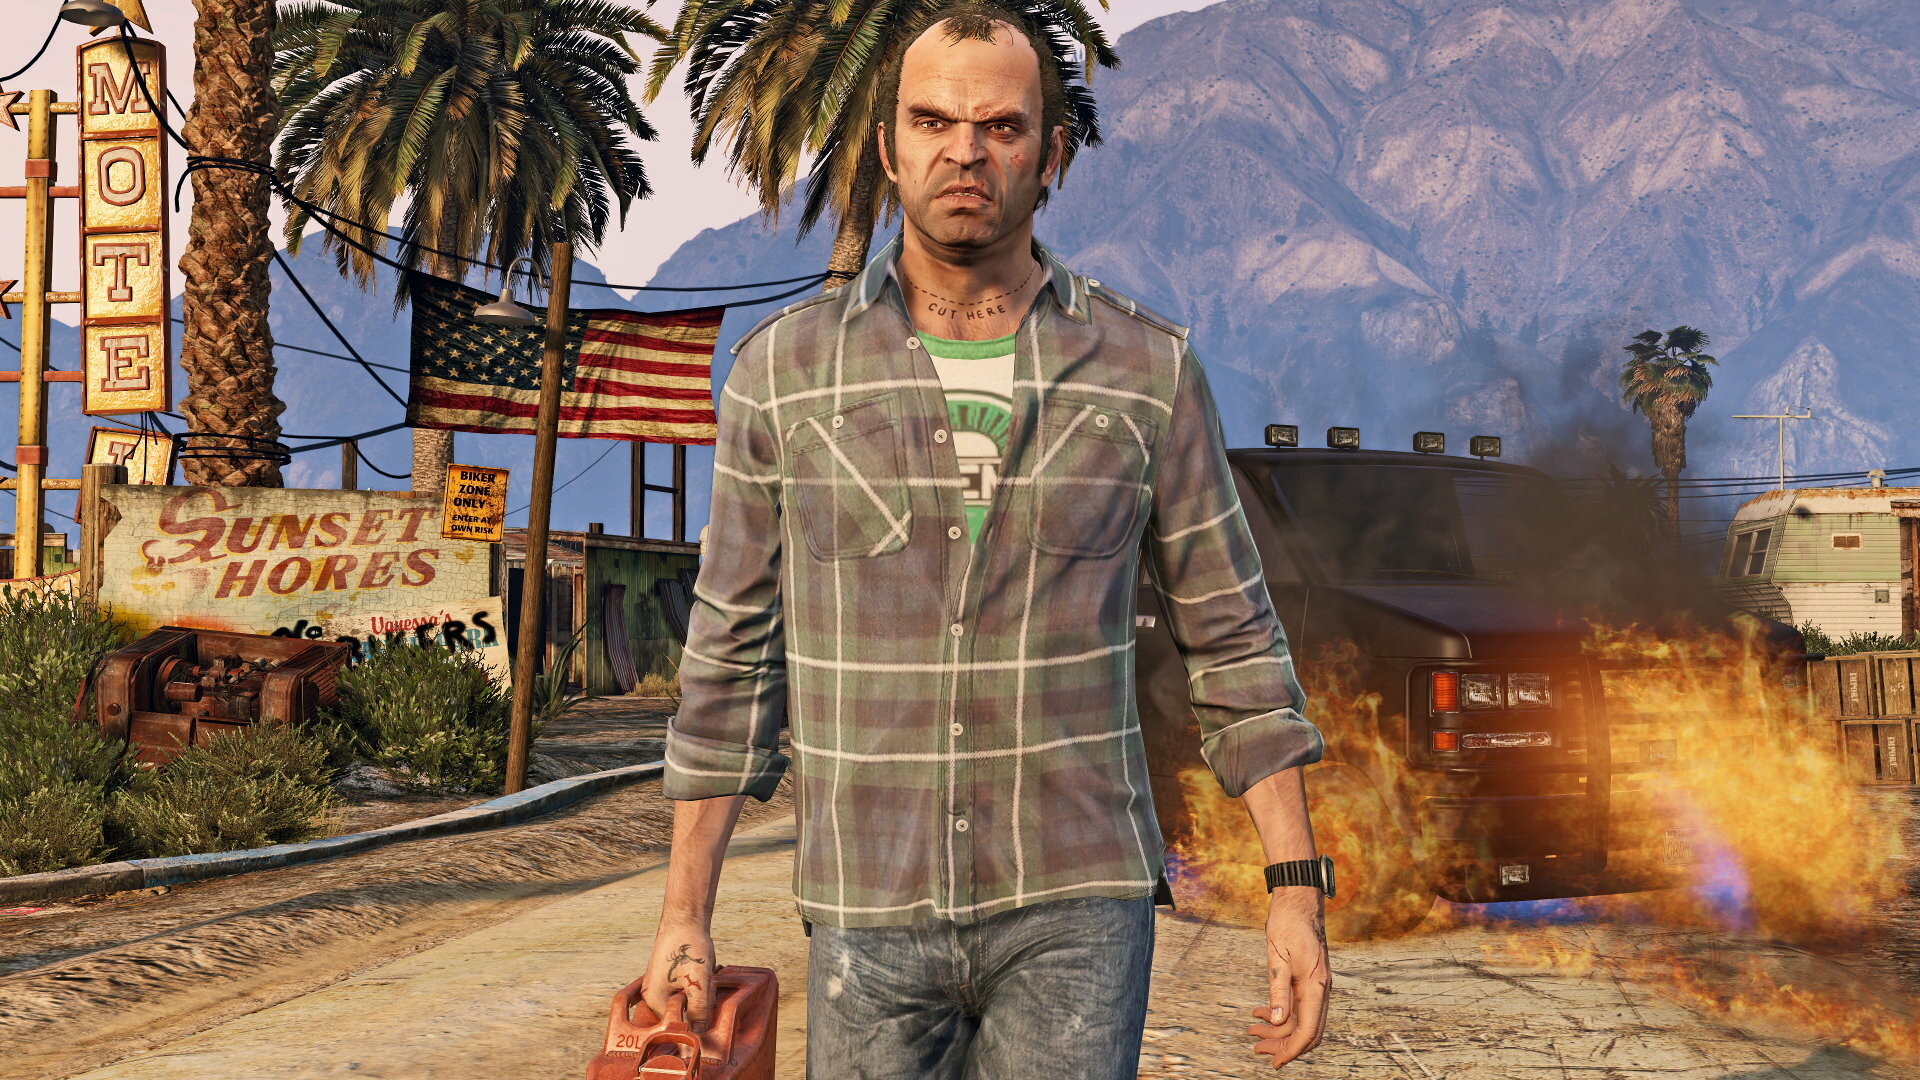 Grand Theft Auto 5: A career criminal and former bank robber, Trevor leads his own organization, Trevor Philips Enterprises. 1920x1080 Full HD Wallpaper.